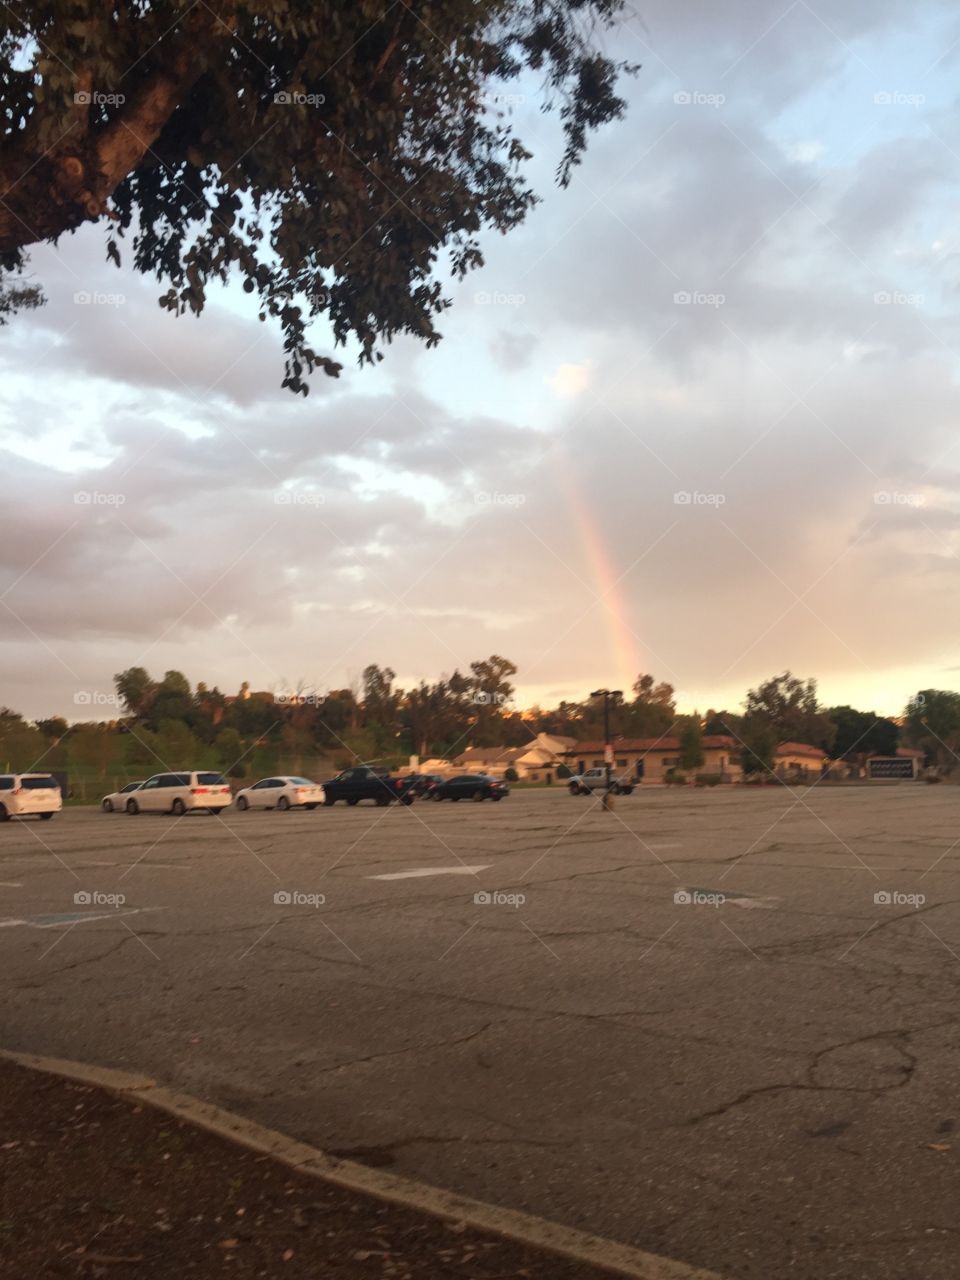 Rainbow in a parking lot. Cloudy day right after rain, sun comes out. 